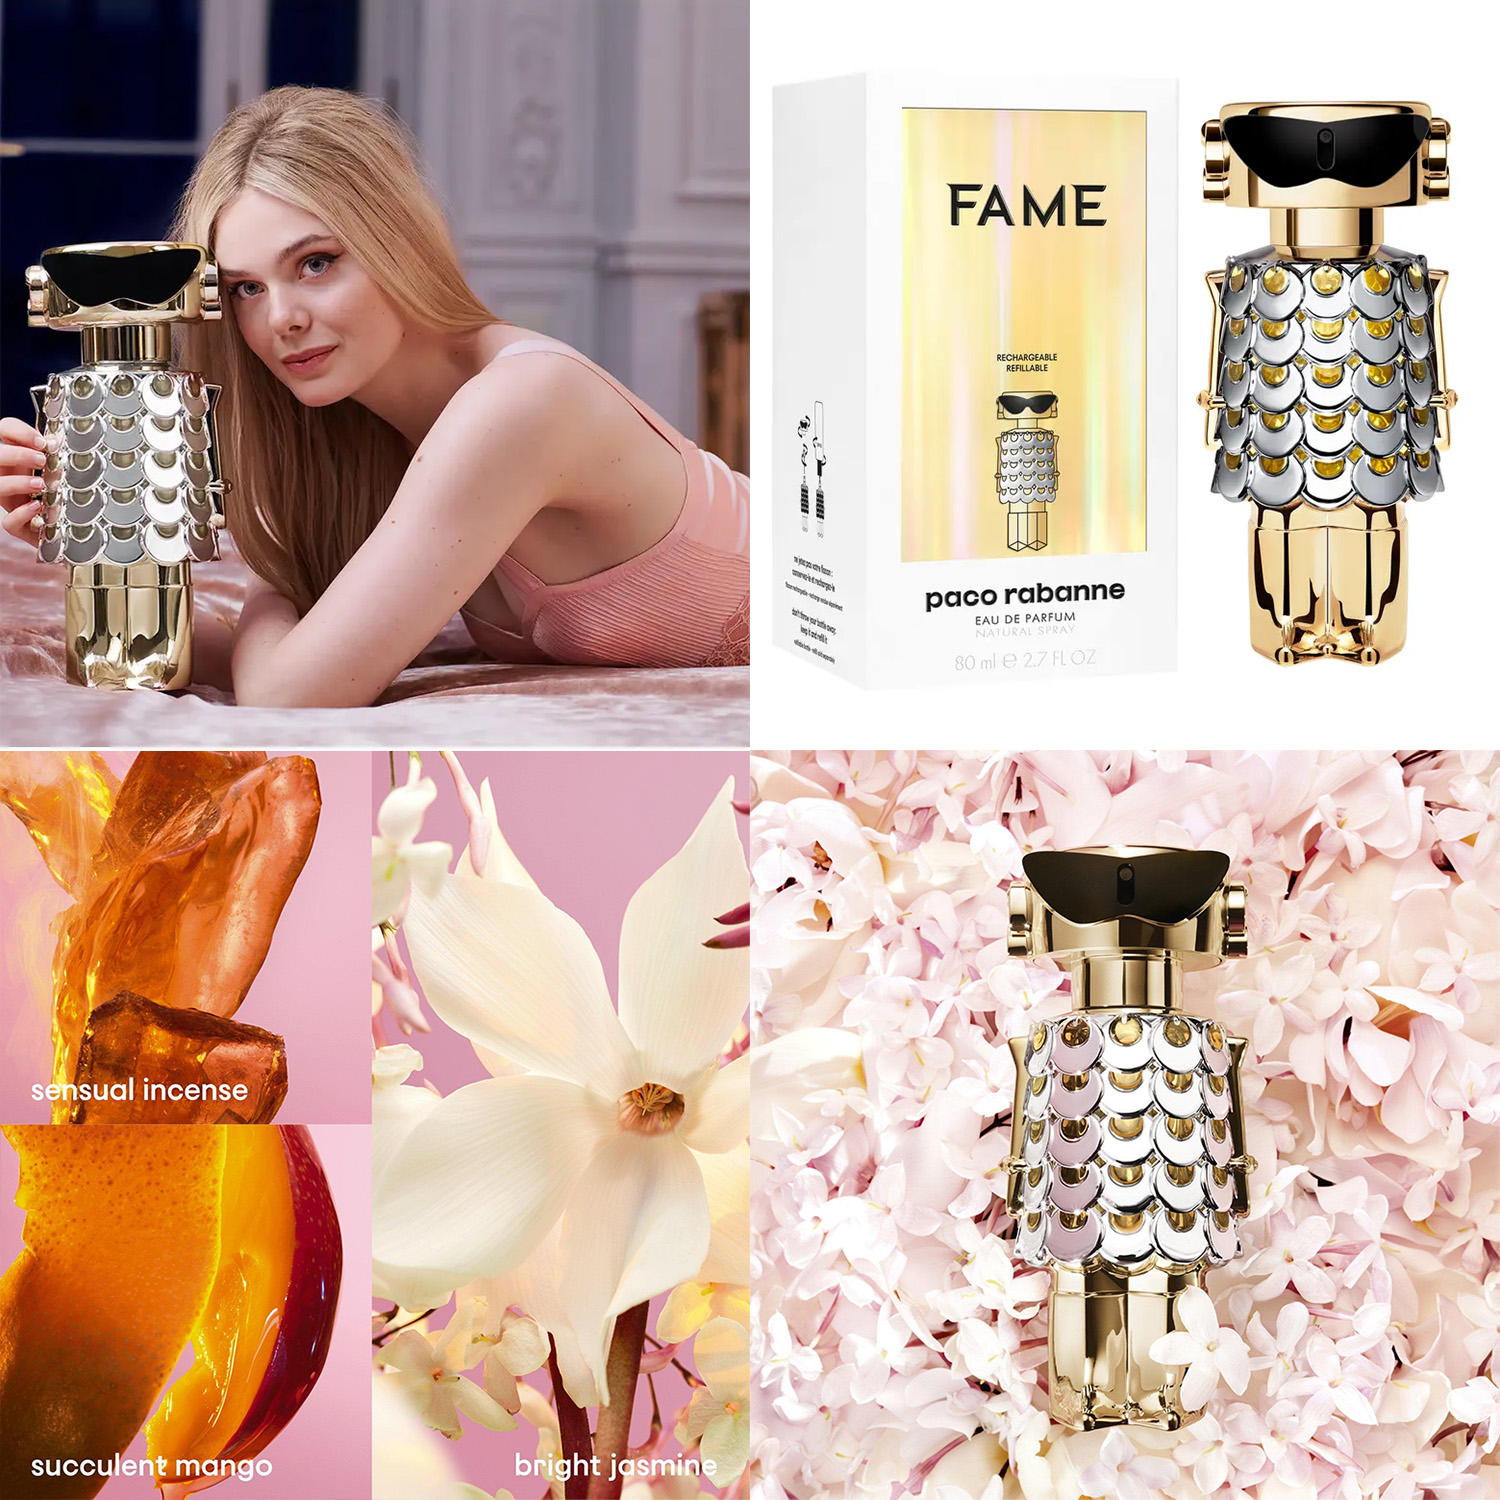 Elle Fanning Paco Rabanne Fame perfume ad campaign